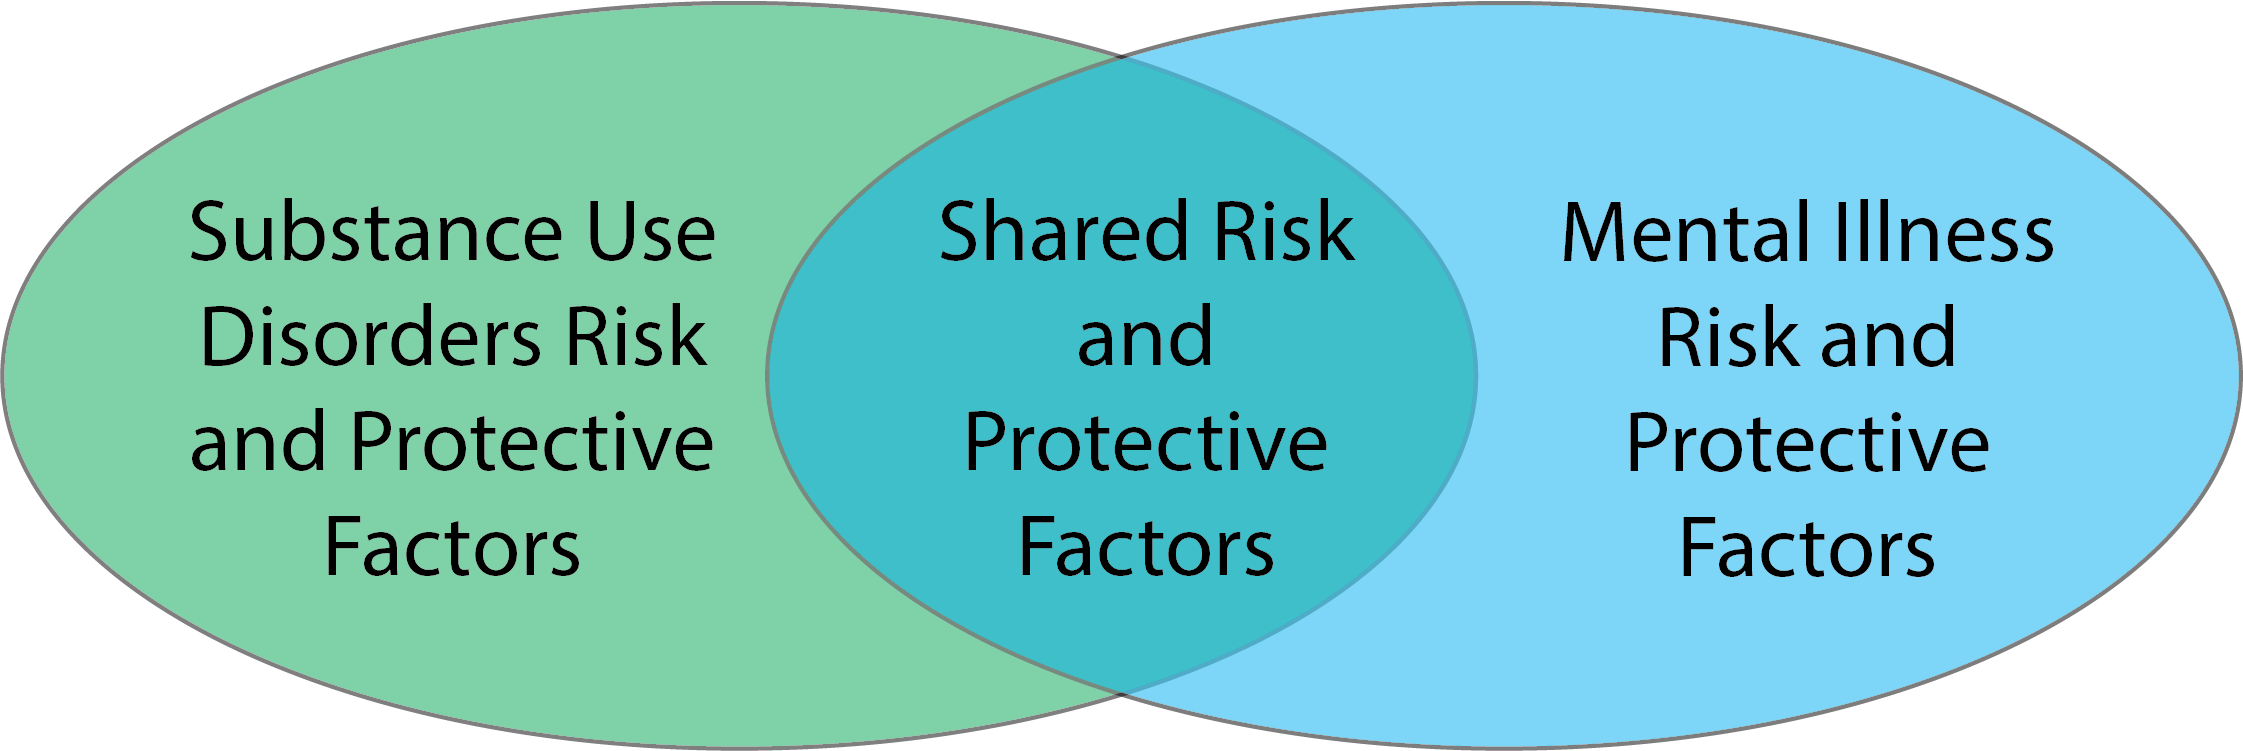 Substance use disorders risk and protective factors in left column; shared risk and protective factors in middle overlapping column; and mental illness risk and protective factors in right column.